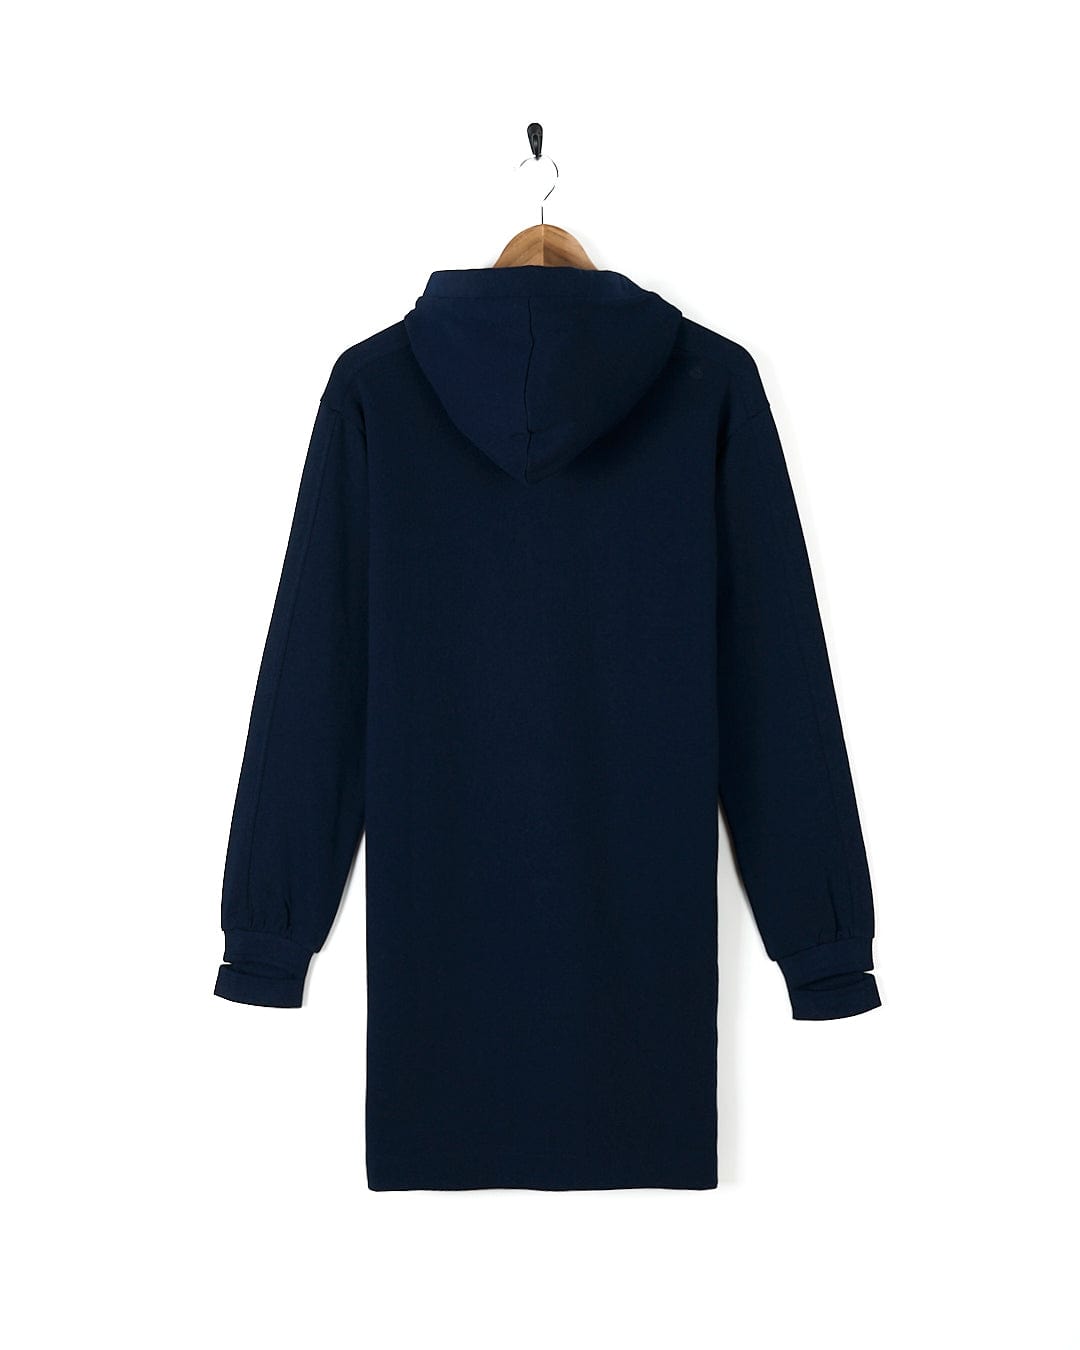 An Elsa - Womens Hooded Sweat Dress - Dark Blue, known for its comfort and style, hanging on a hanger.